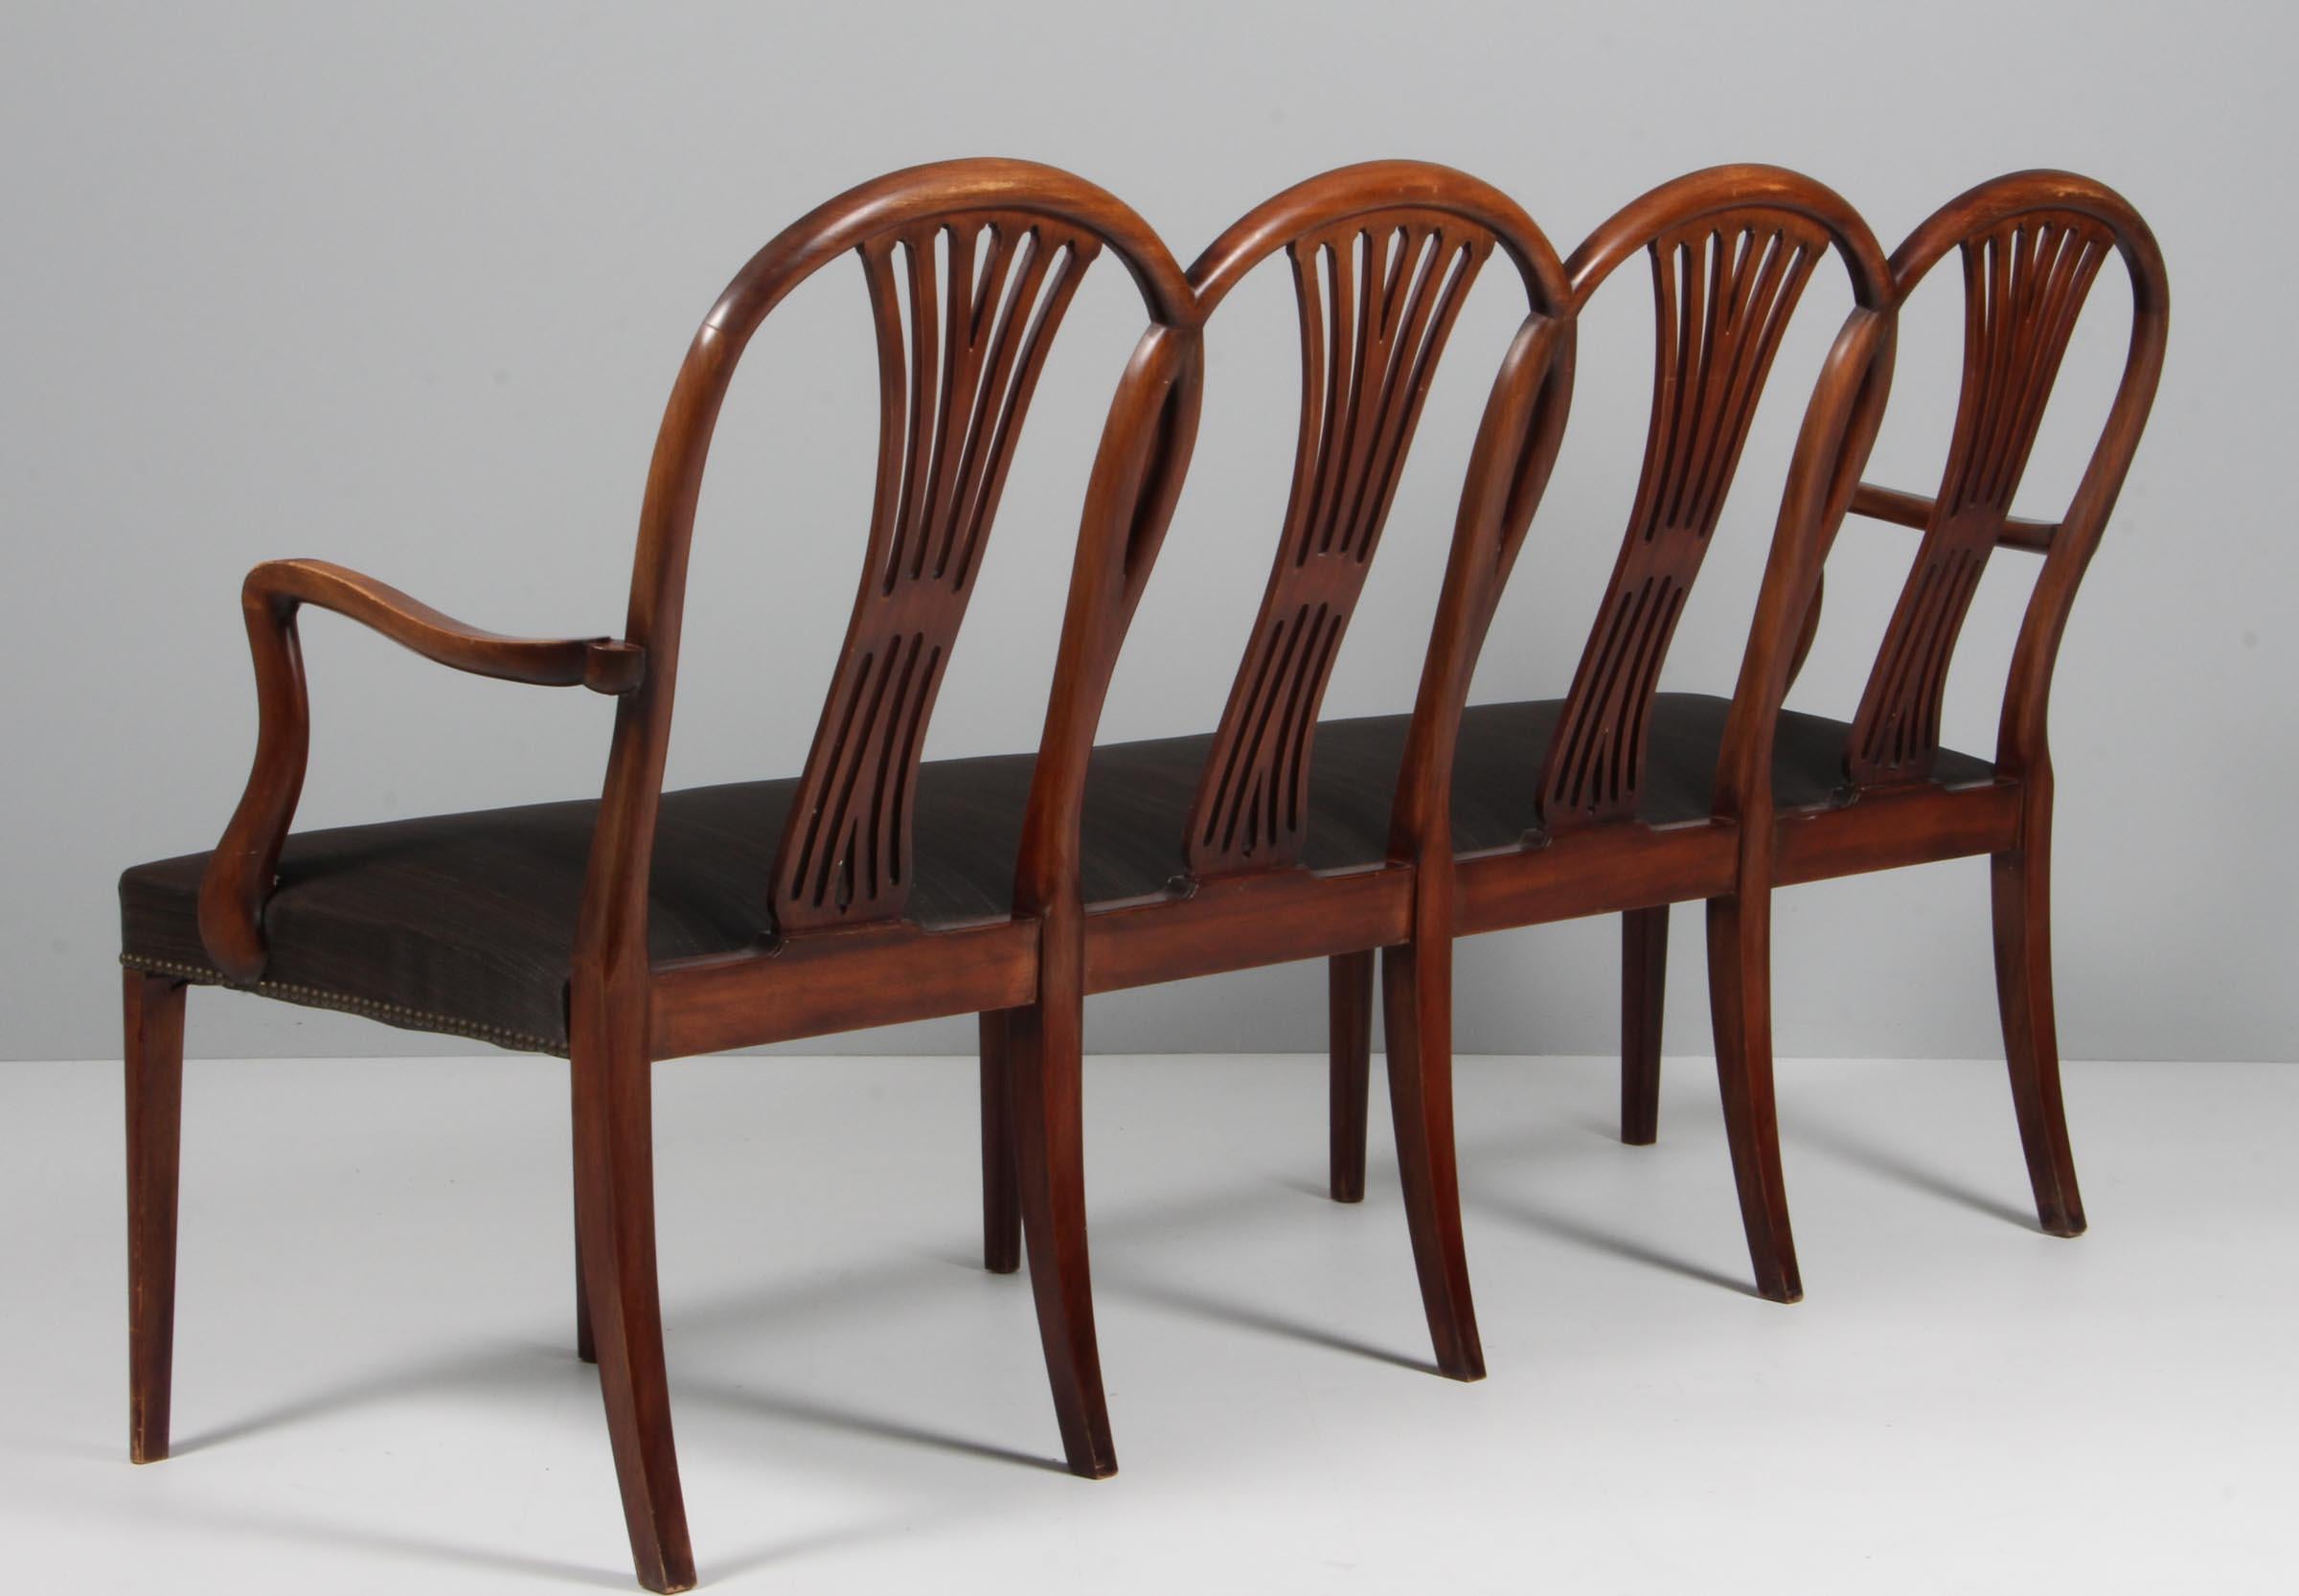 Frits Henningsen four seat bench with frame of mahogany.

Seat of horsehair.

Made in the 1940s.

